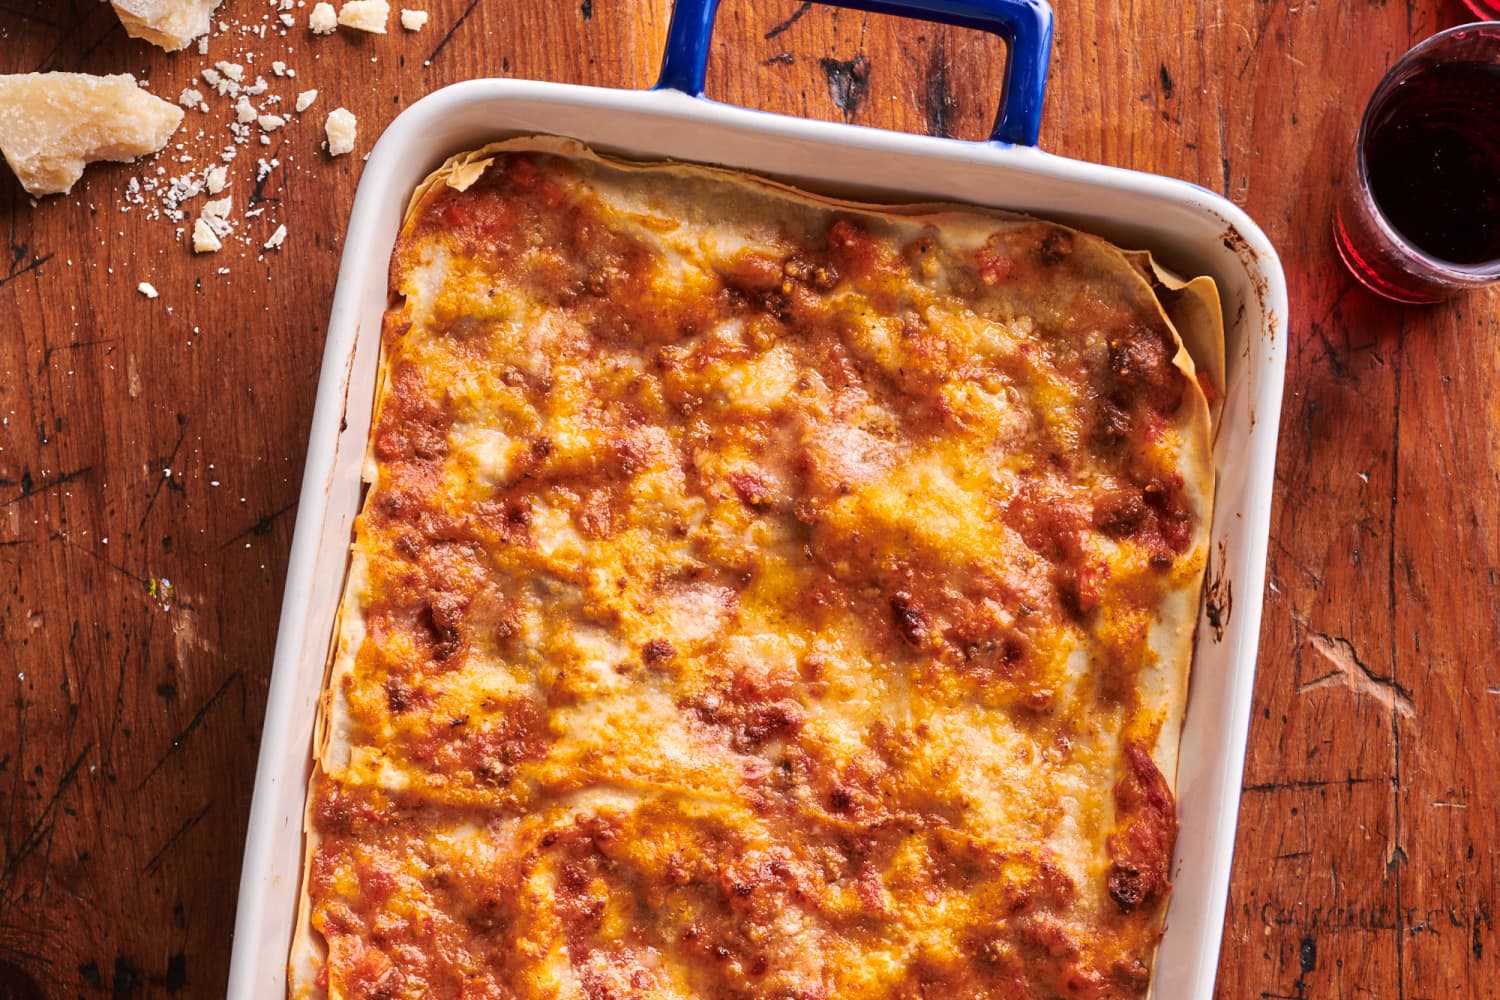 https://cdn.apartmenttherapy.info/image/upload/f_auto,q_auto:eco,c_fill,g_auto,w_1500,ar_3:2/k%2FPhoto%2FRecipes%2F2020-10-How-to-Make-Lasagna-Bolognese%2FHow-to-Make-Lasagna-Bolognese_093